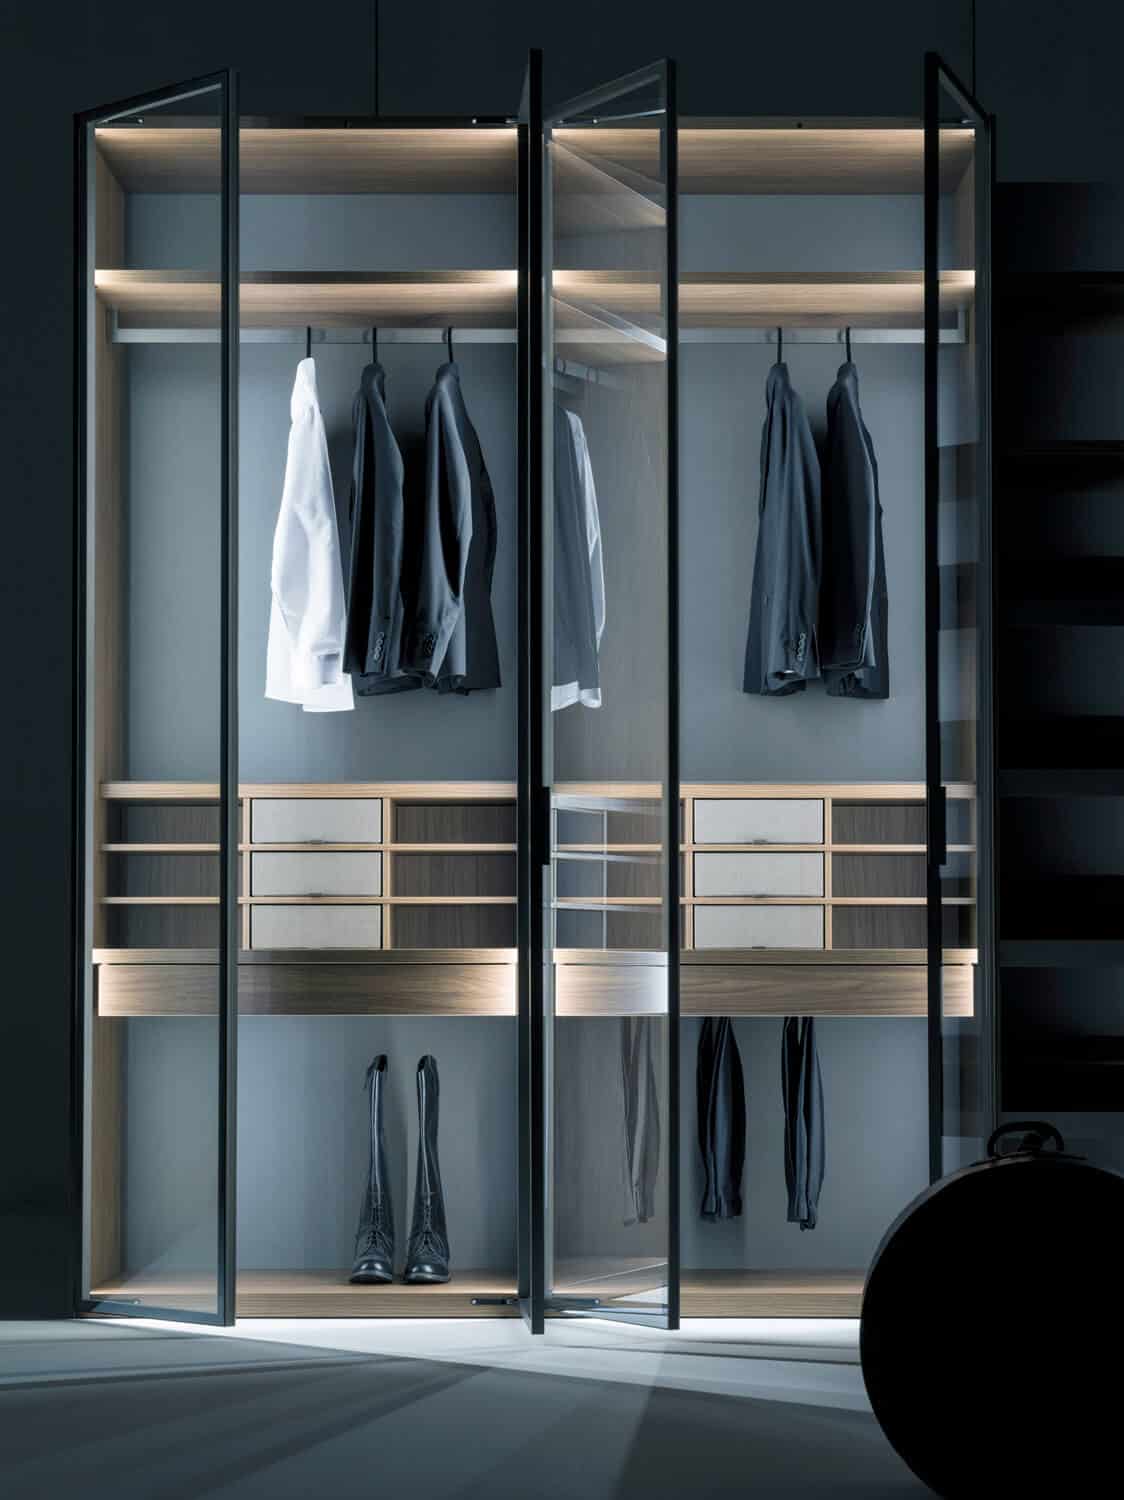 Core framed swing doors in silver stop-sol glass. Customization modules include open grids between the shelves, with or without fabric-covered drawers.